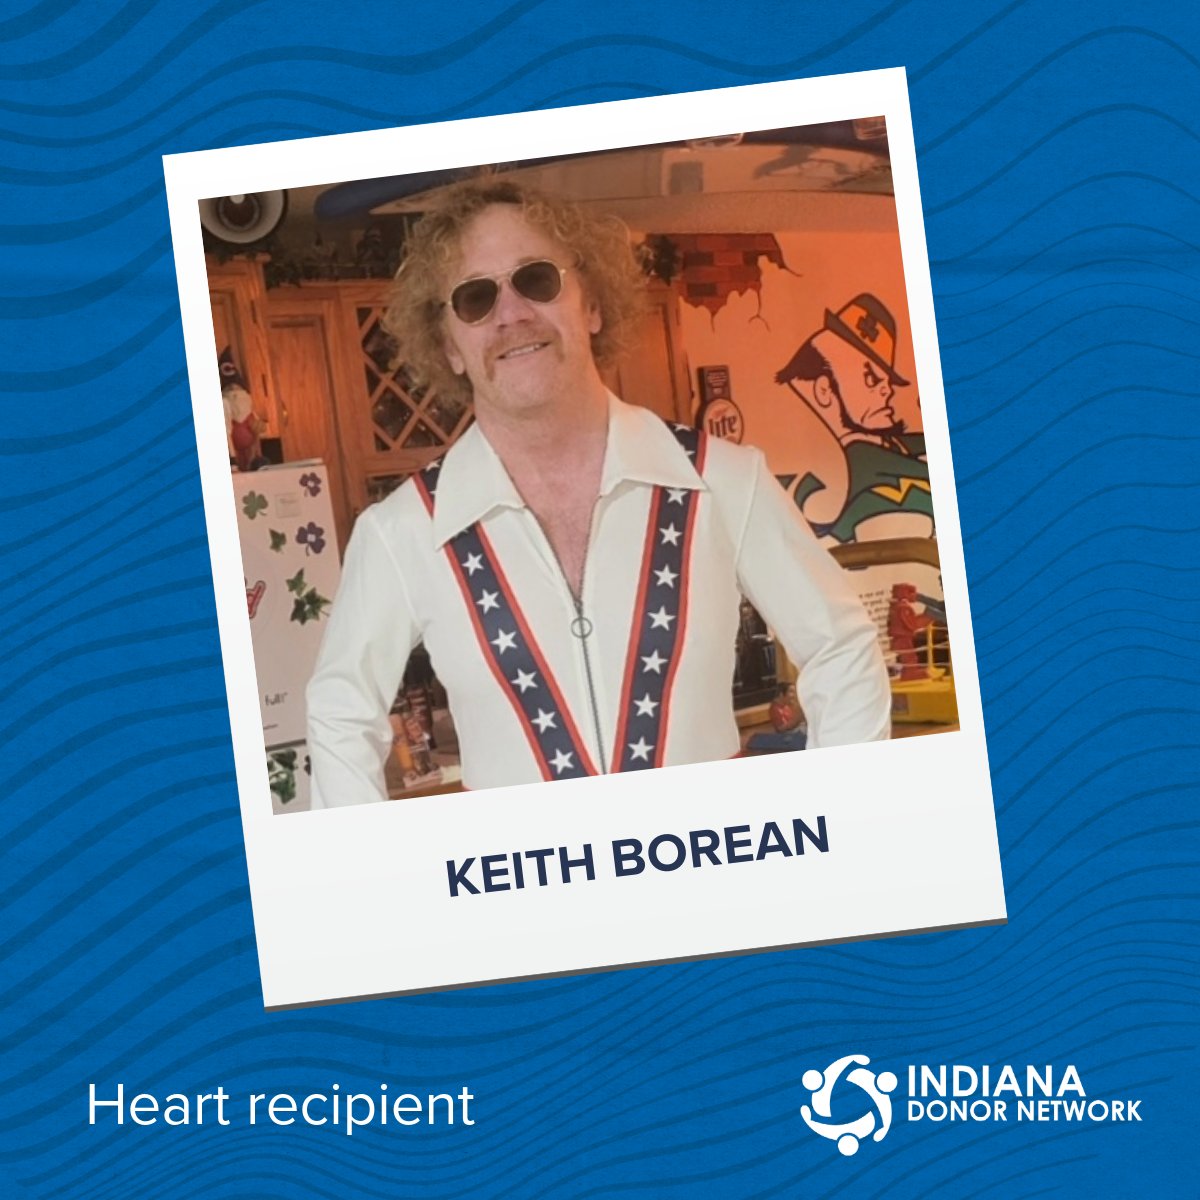 RECIPIENT FEATURE: Meet Keith, an Indiana Donor Network advocate and heart recipient. Be a donor. Save a life. Sign up today at donatelifeindiana.org/show-your-supp….